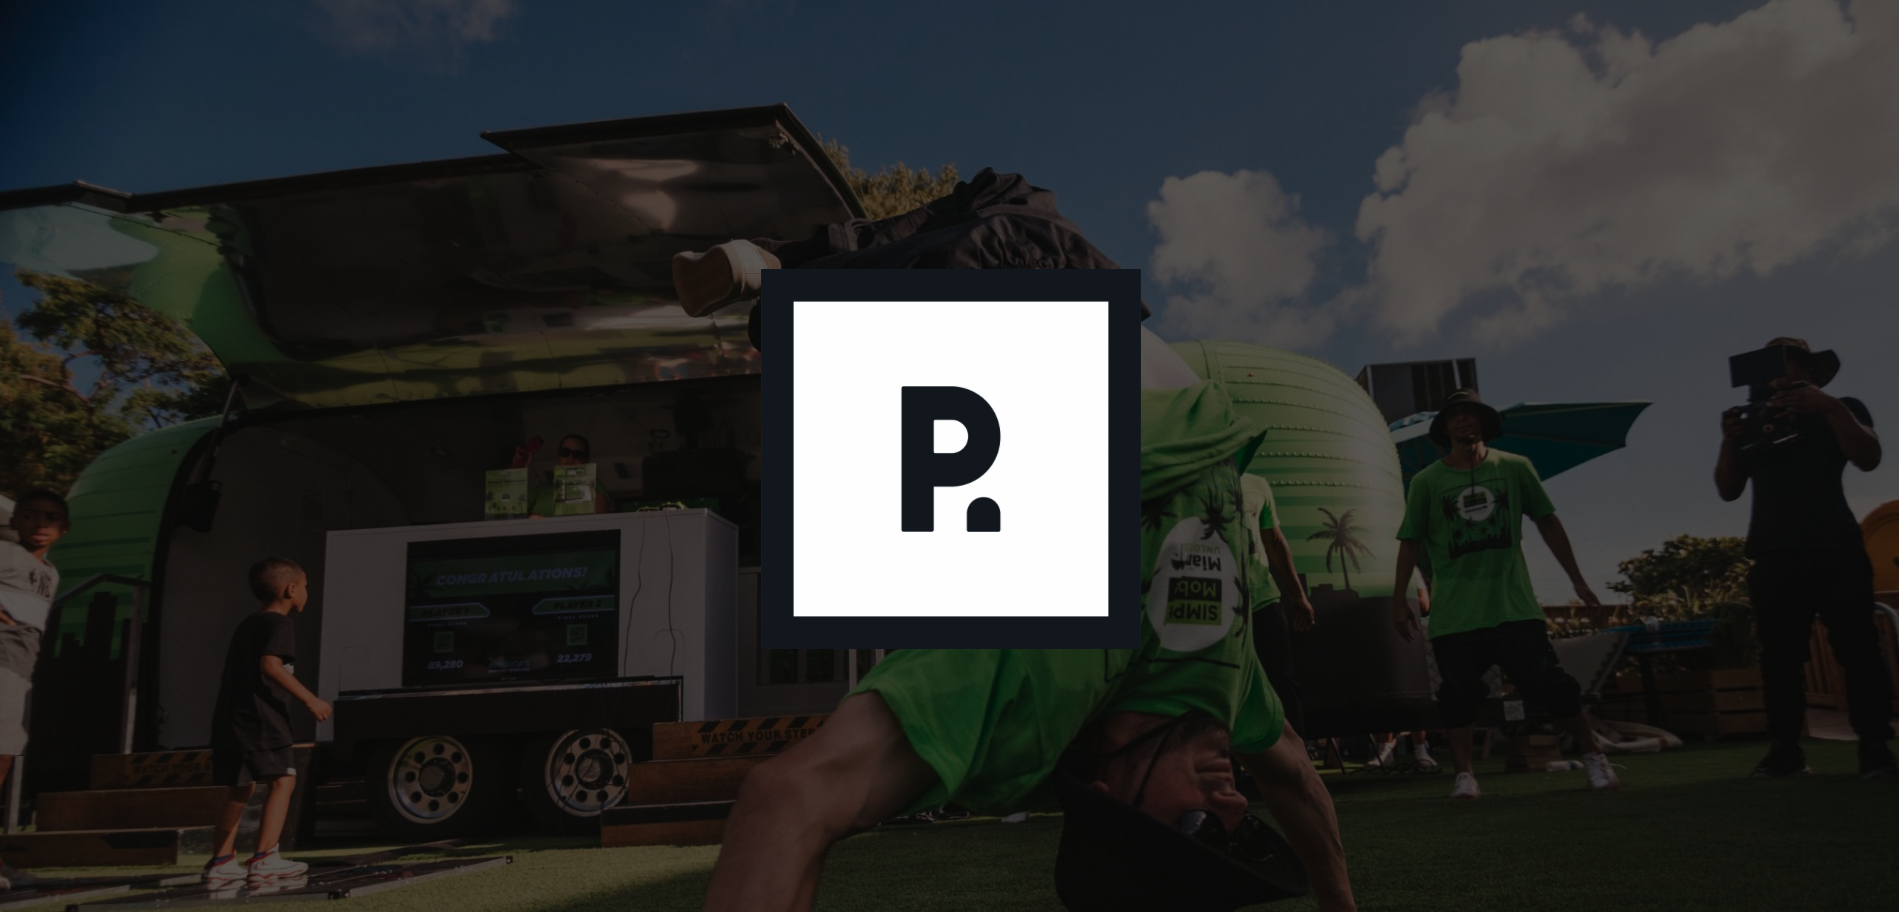 IU C&I Studios Page Pierce Promotion Cover with a black and white logo against a backdrop of Simple Mobile employees by company van with one doing a headstand